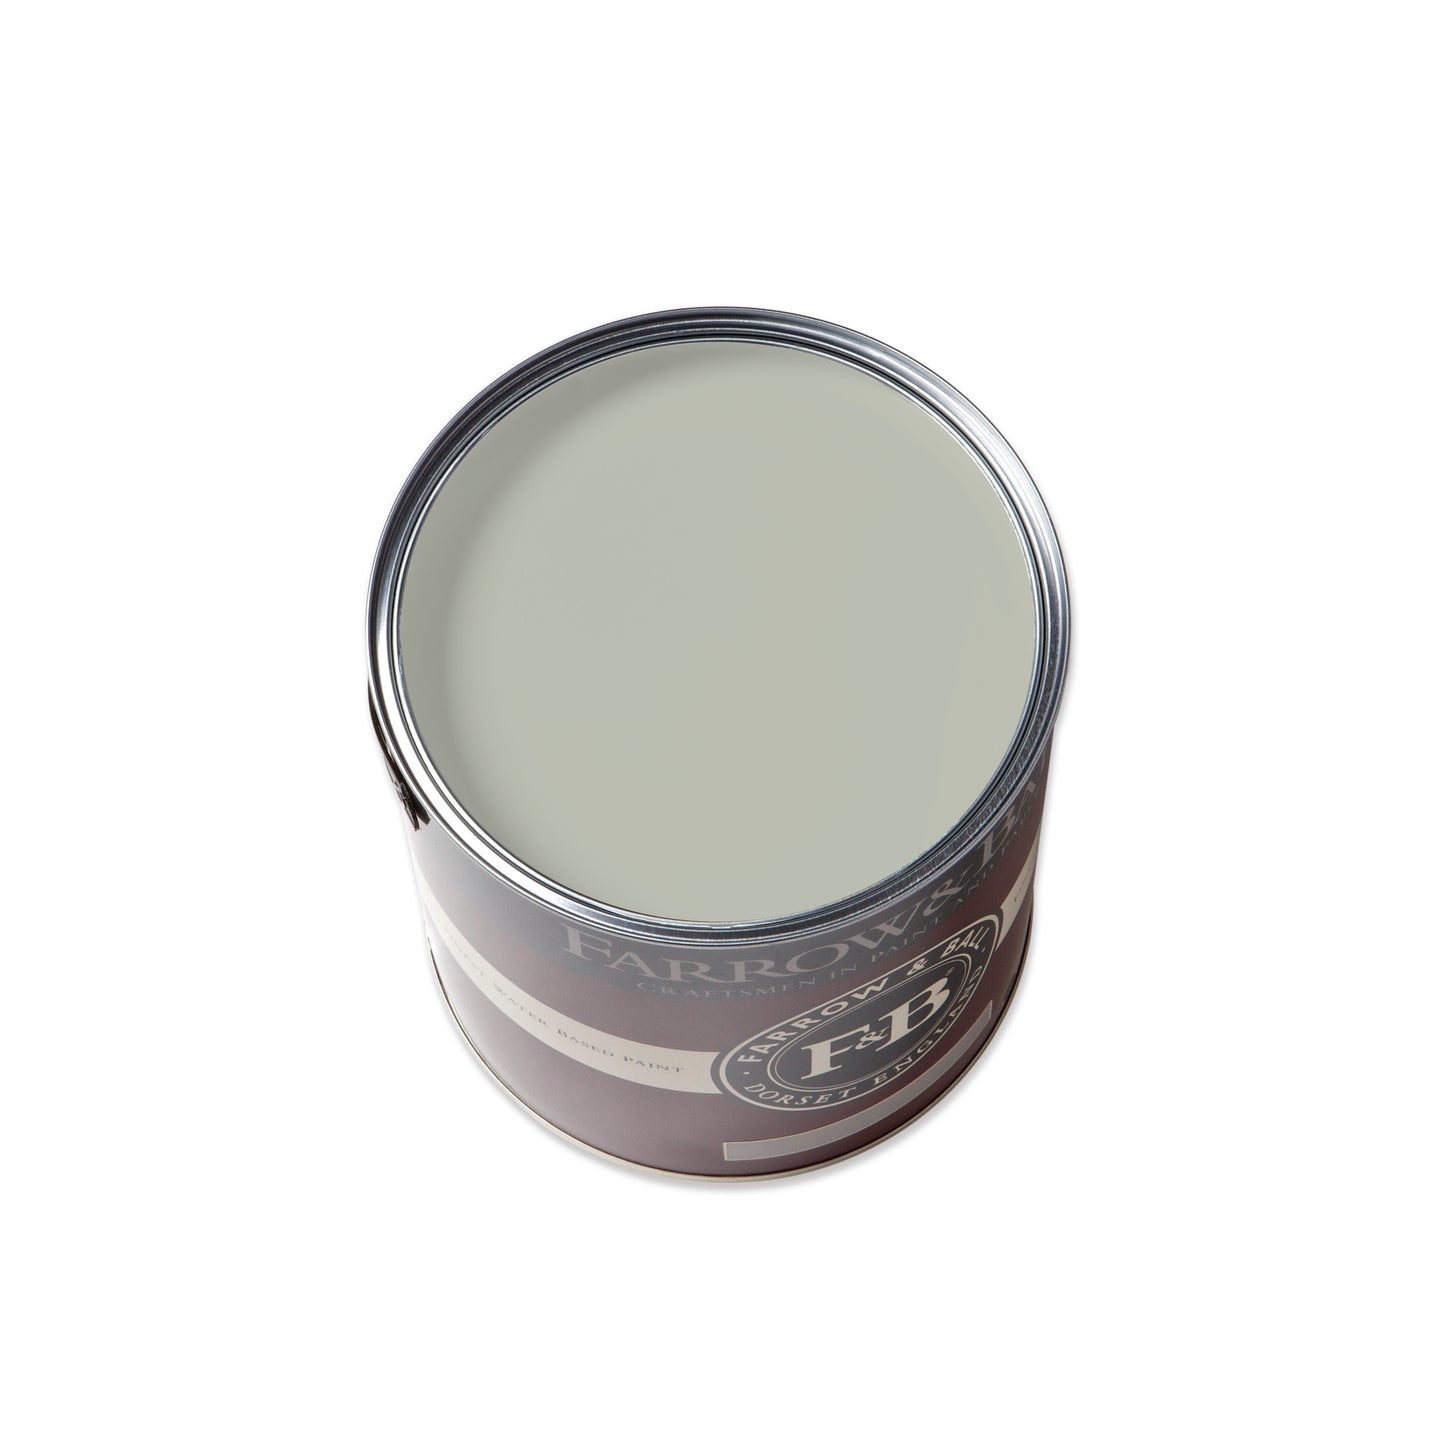 Farrow and Ball Paint- Cromarty No. 285